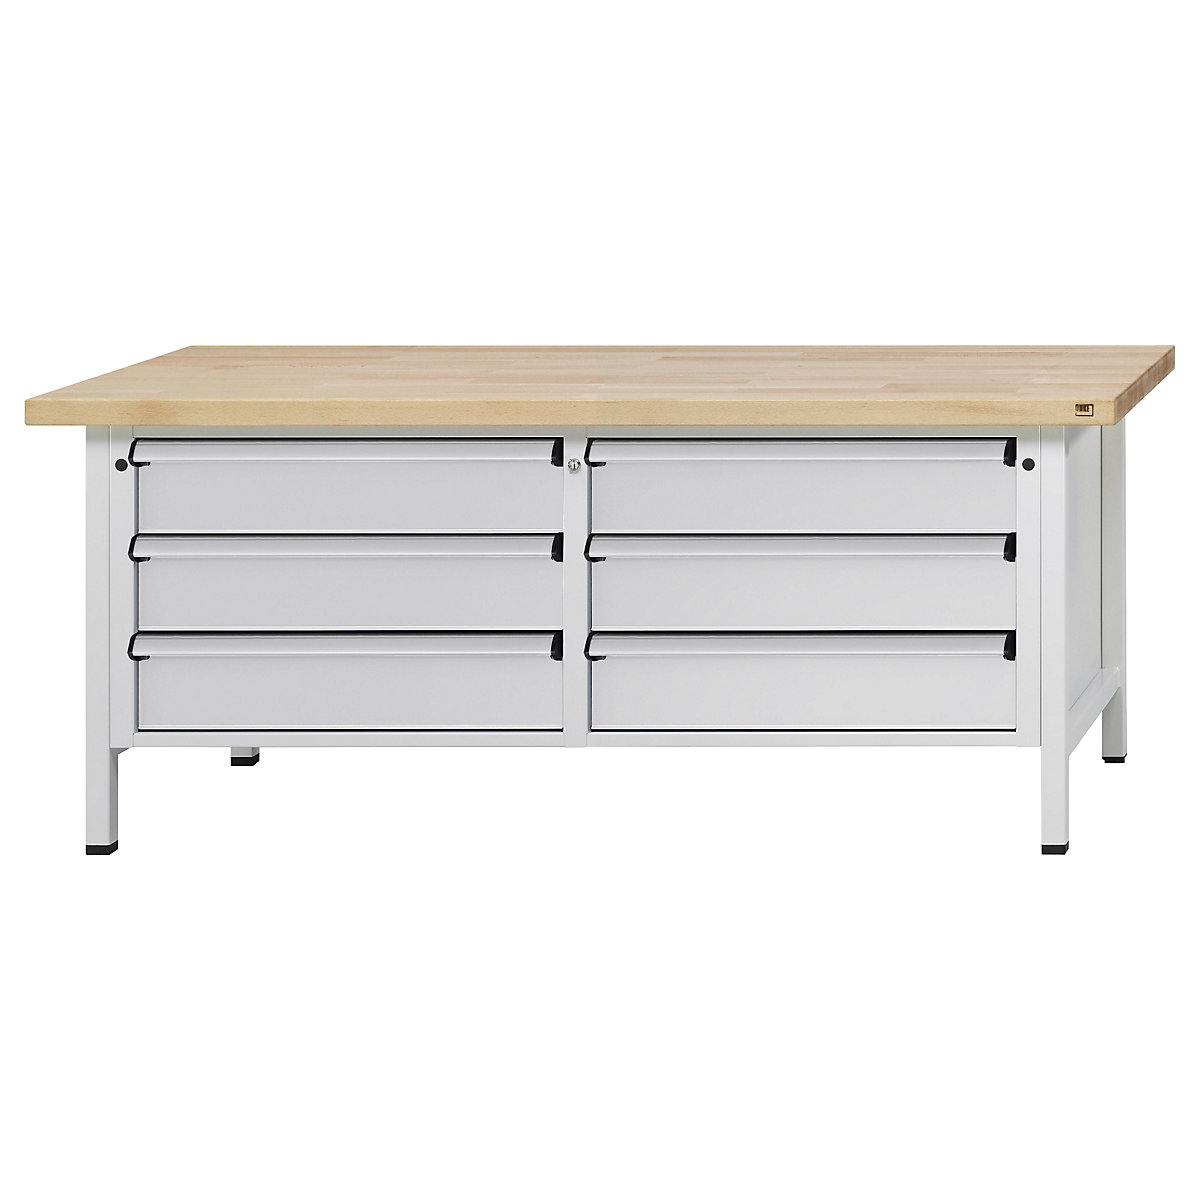 Workbench with XL/XXL drawers, frame construction – ANKE, width 2000 mm, 6 x 180 mm drawers, solid beech worktop, front in light grey-13